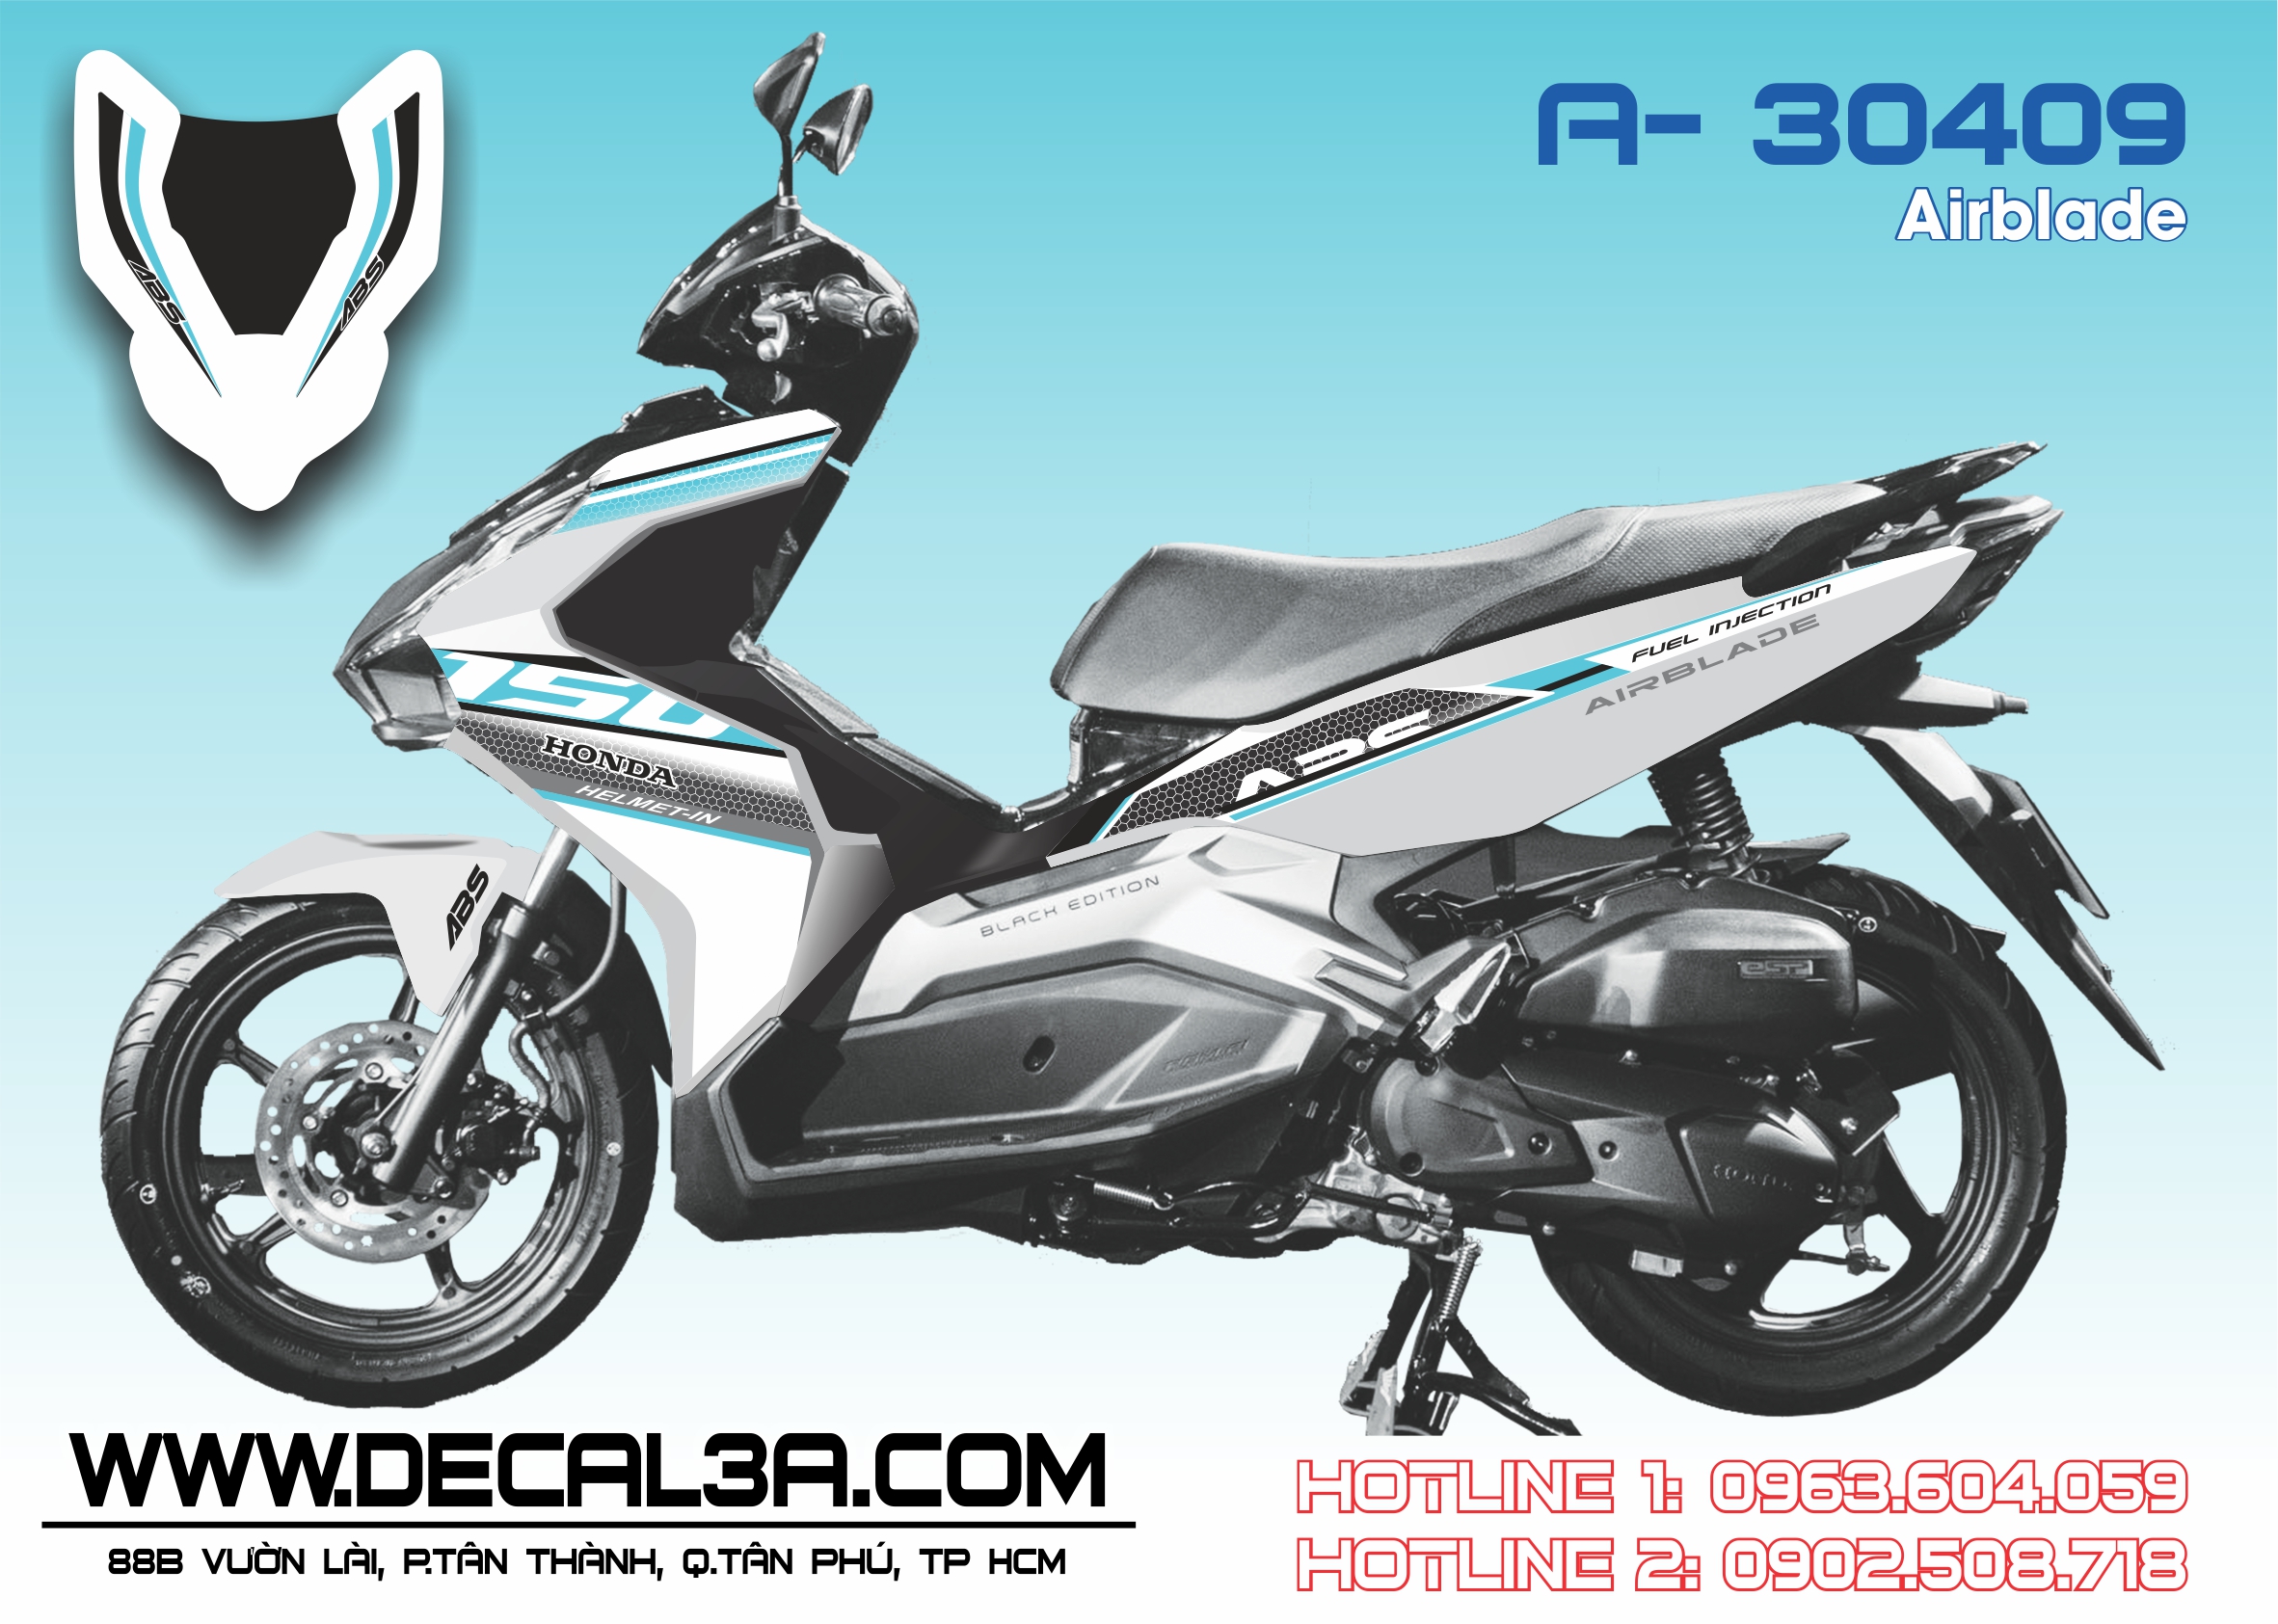 AirBlade ABS tổ ong - A 30409